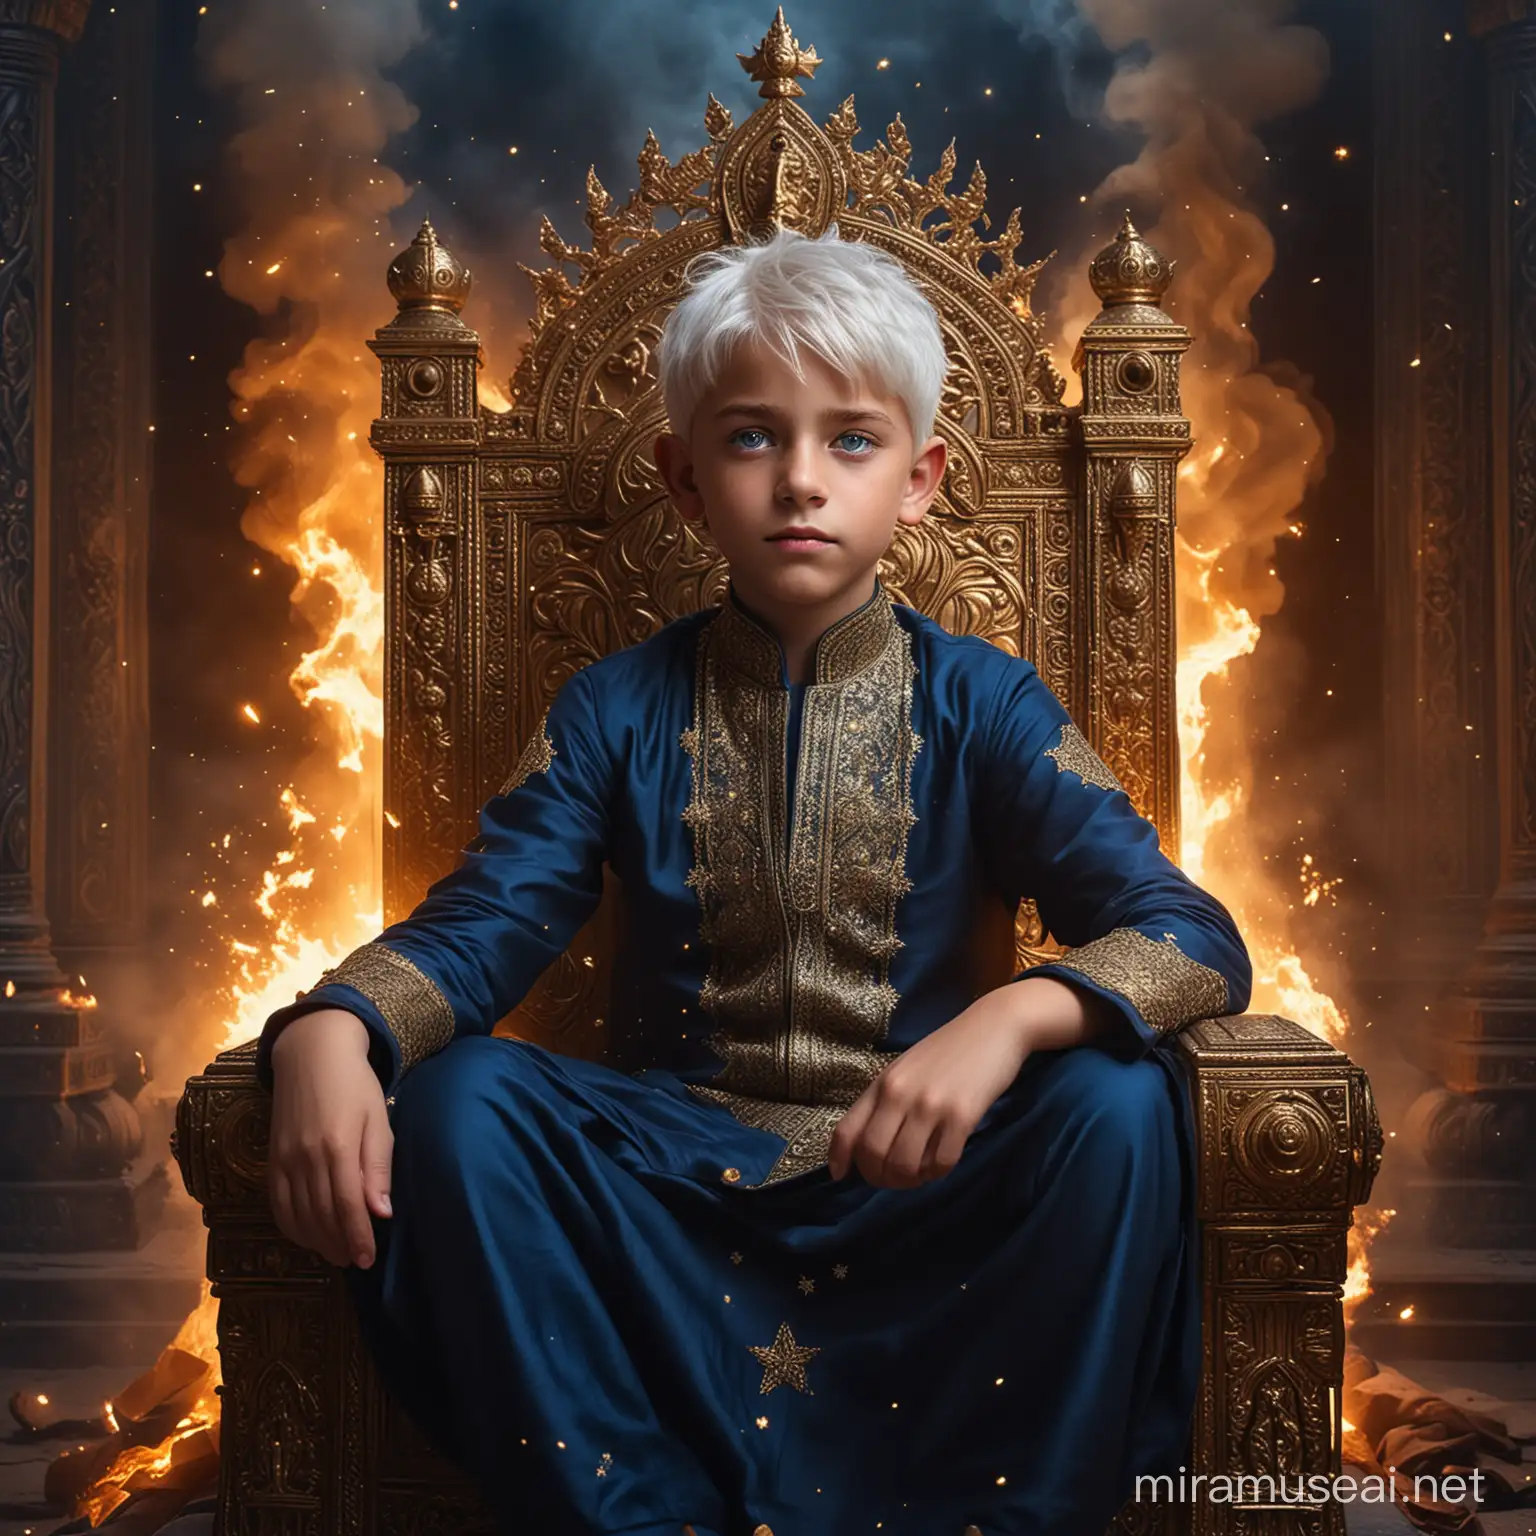 Majestic Throne Young Boy Surrounded by Fire and Power in Hindu Palace